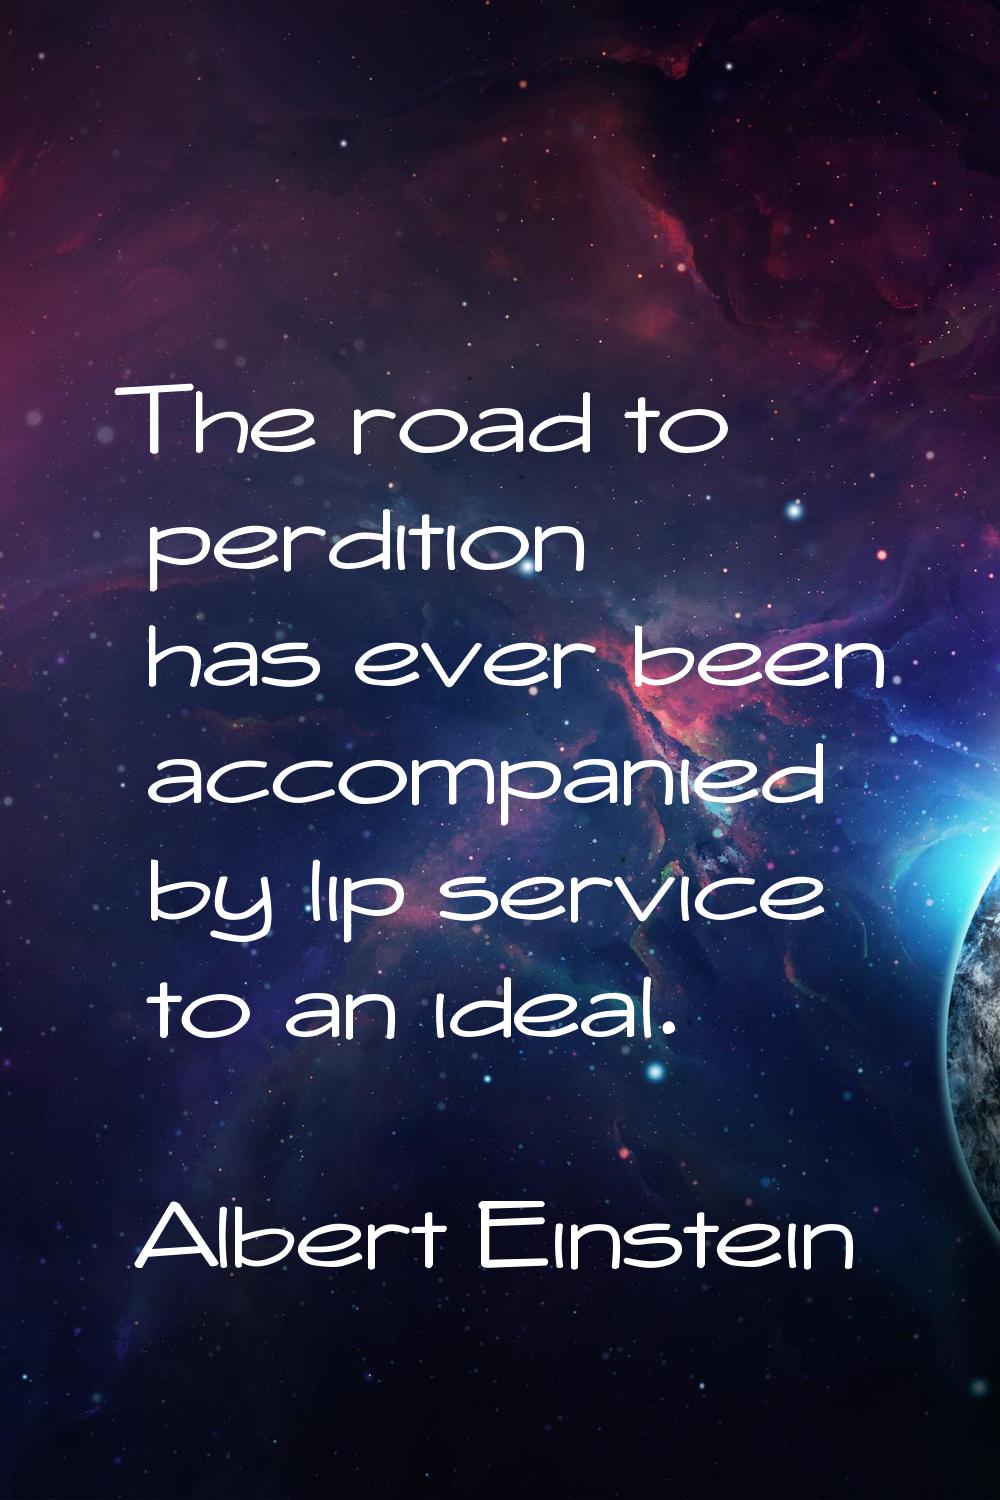 The road to perdition has ever been accompanied by lip service to an ideal.